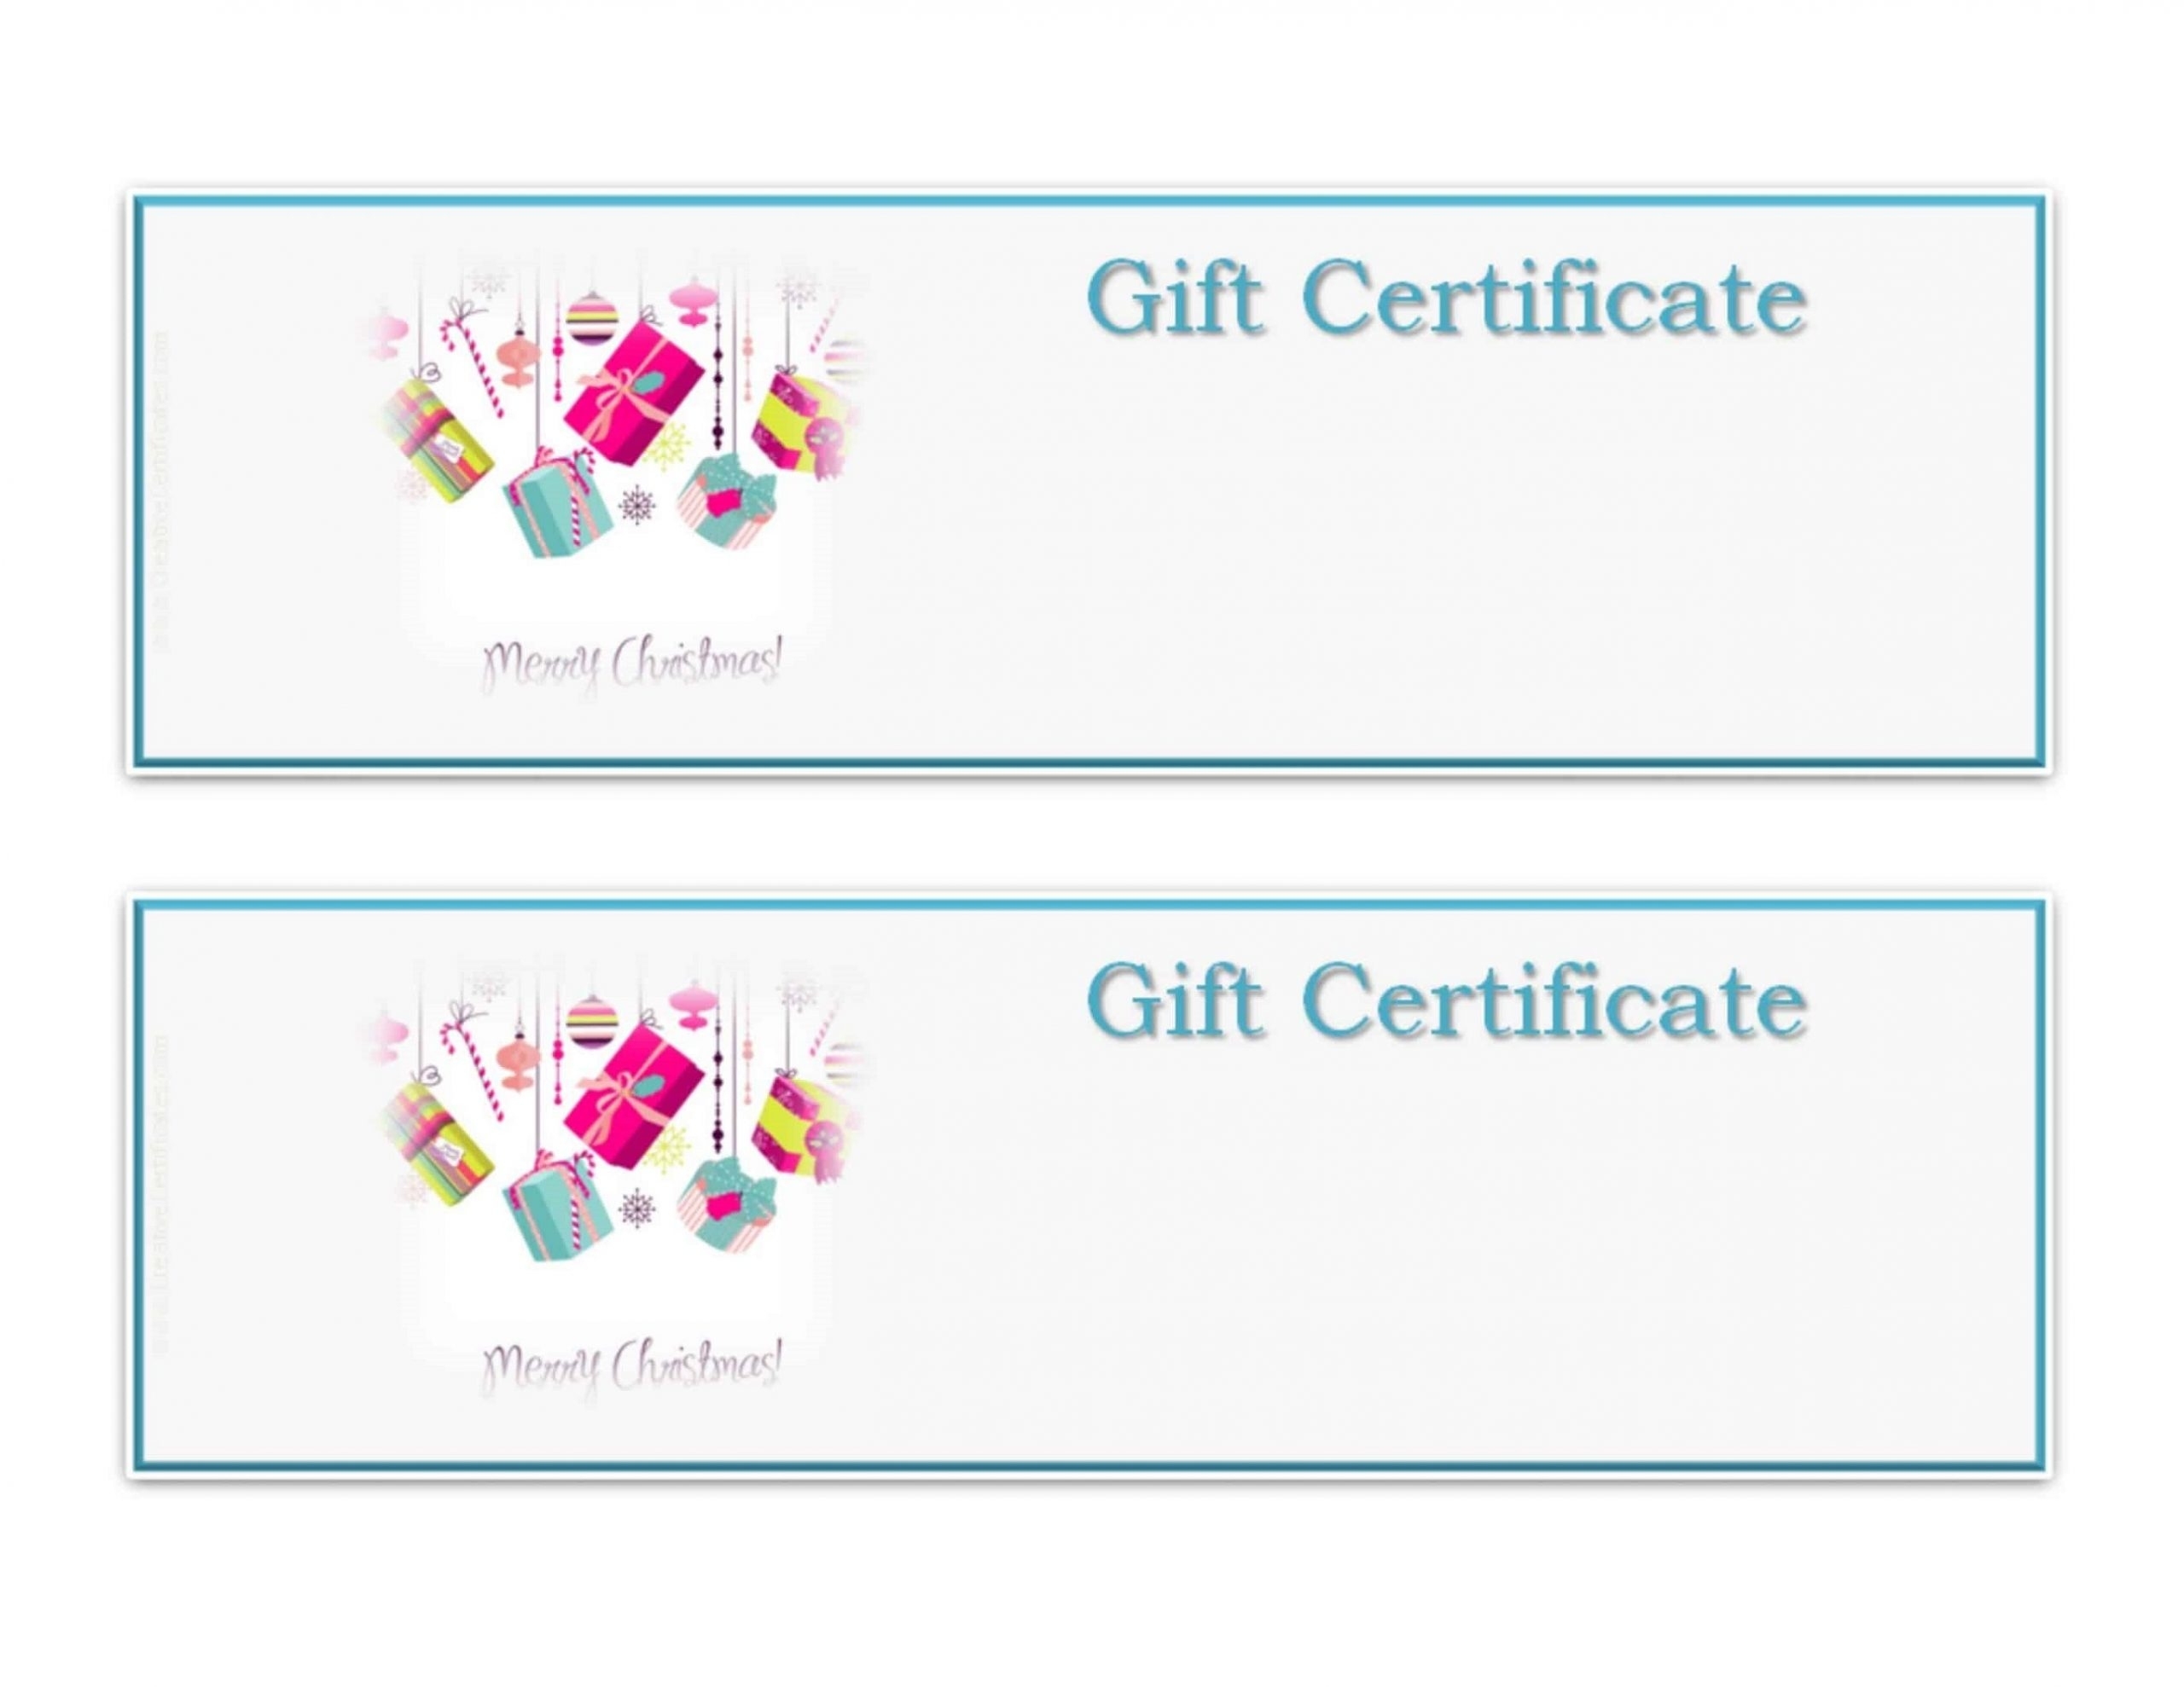 Gift Certificate Templates To Print For Free | 101 Activity Regarding Printable Gift Certificates Templates Free